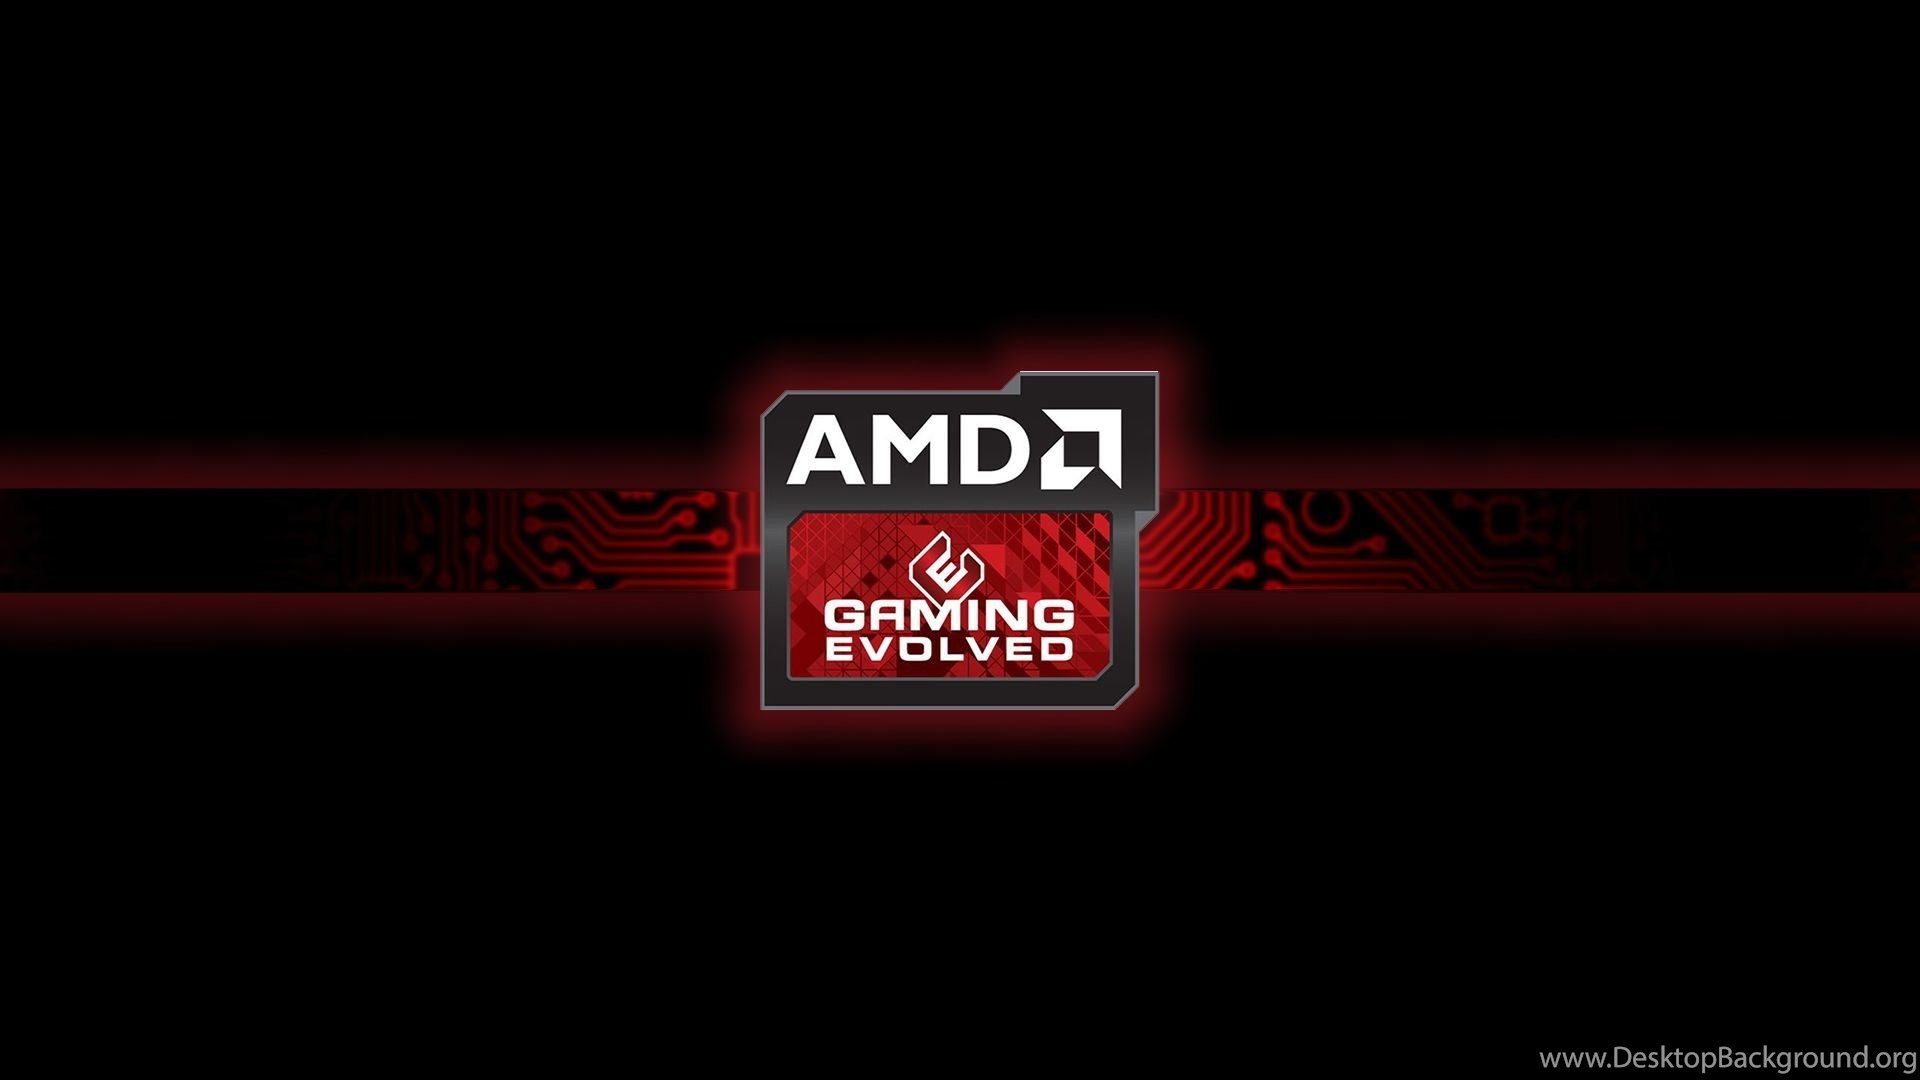 Download Amd Wallpapers 3467 19x1080 Px High Resolution Wallpapers Desktop Background